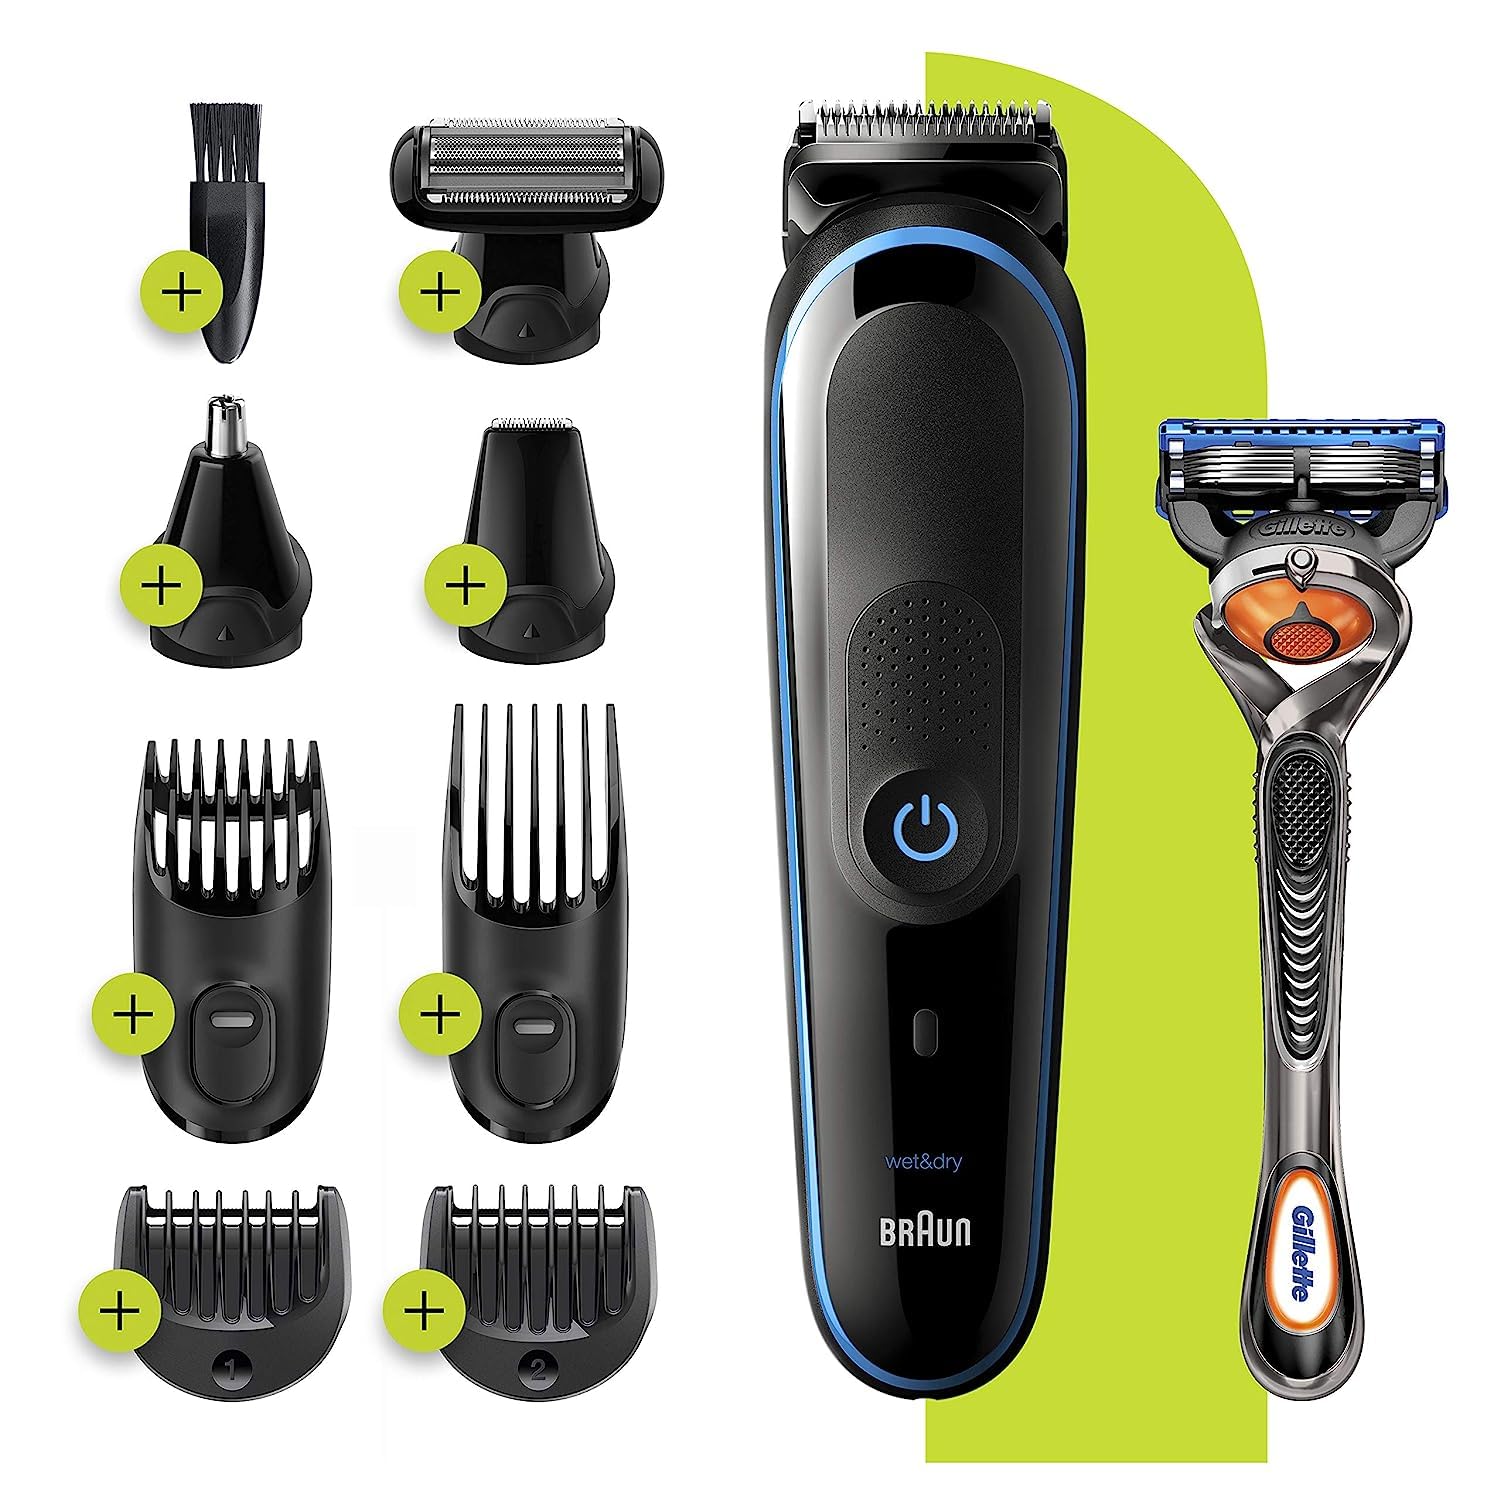 Braun Hair Clippers for Men 9-in-1 Beard, Ear and Nose Trimmer, Mens Grooming Kit, Body Groomer, Cordless & Rechargeable with Gillette ProGlide Razor, Black/Blue